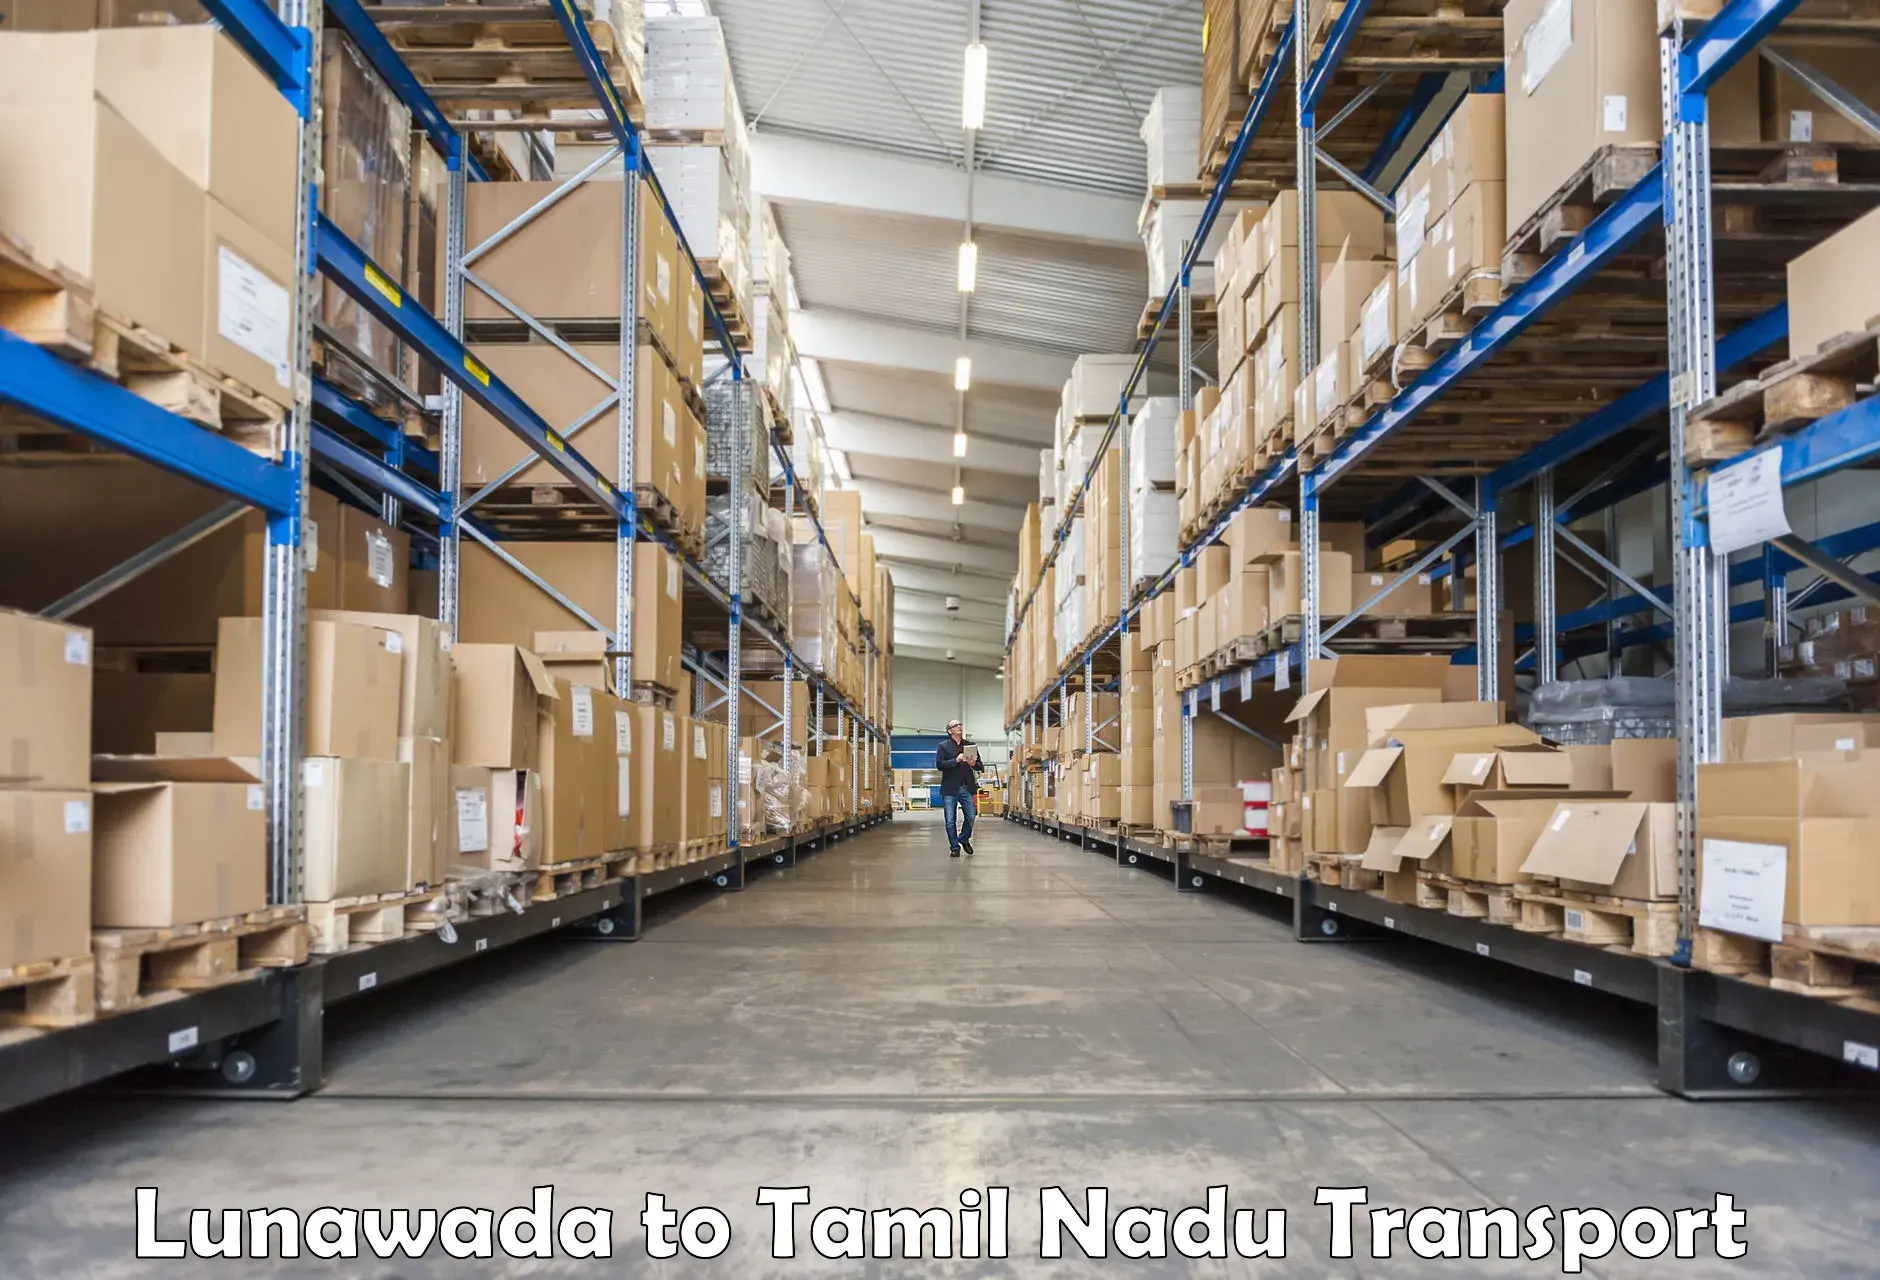 Daily parcel service transport Lunawada to Shanmugha Arts Science Technology and Research Academy Thanjavur